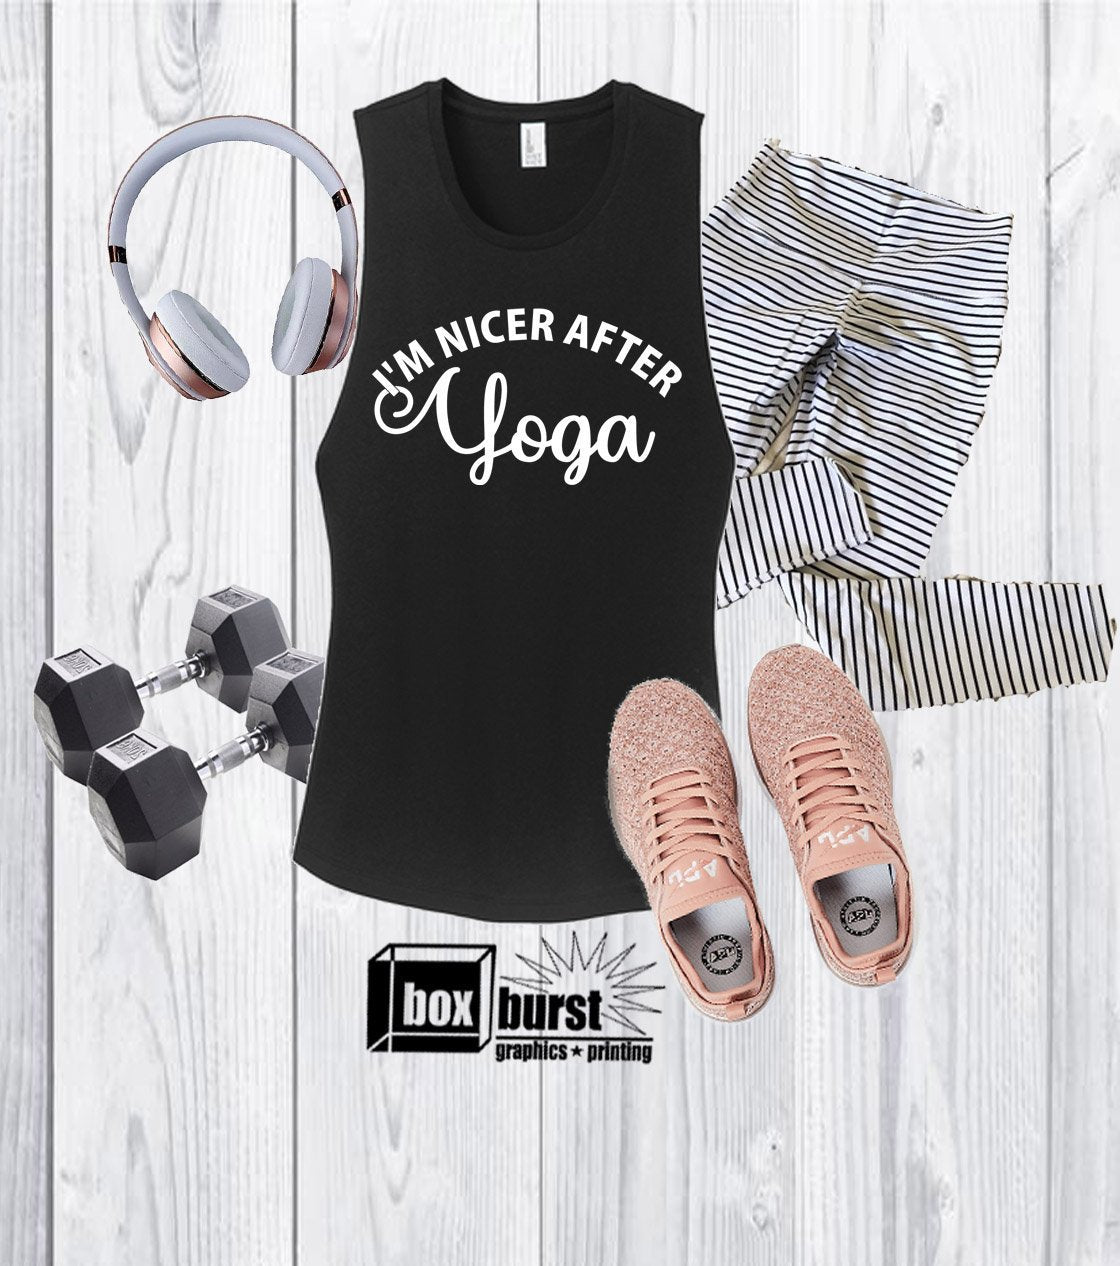 Nicer after Yoga | Yoga shirts | Yoga Tank Tops | But first Yoga | Gym Muscle Tank | Cut Off Tank Top |